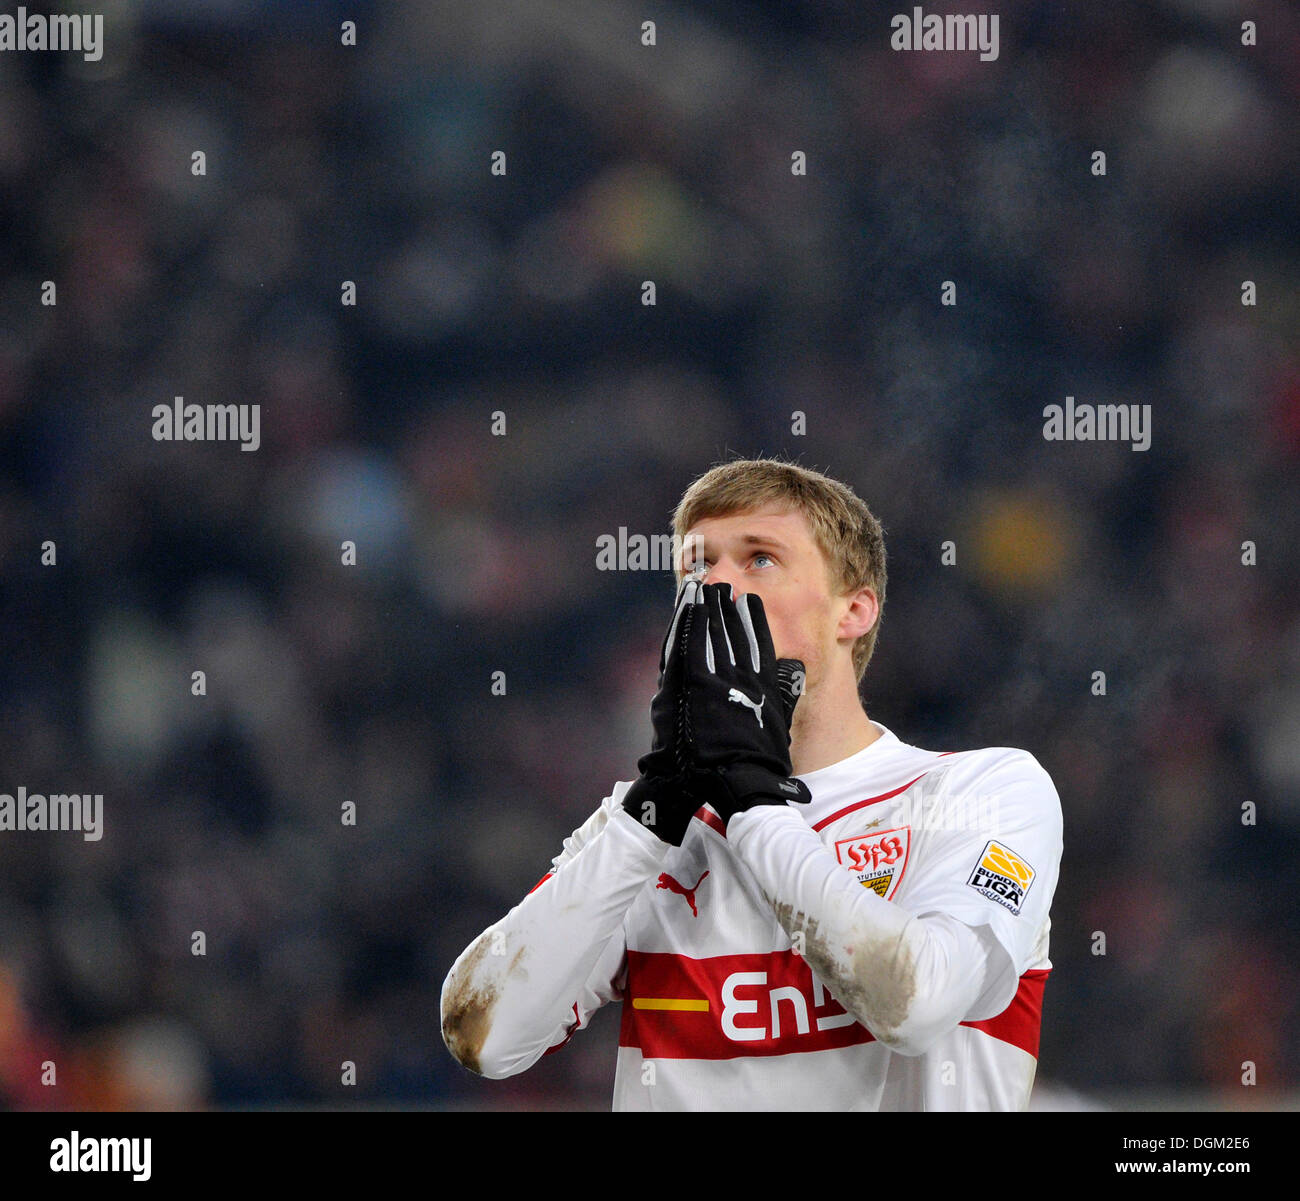 Pavel PROGREBNYAK, VfB Stuttgart, mourning after a missed opportunity, looking up to the sky Stock Photo